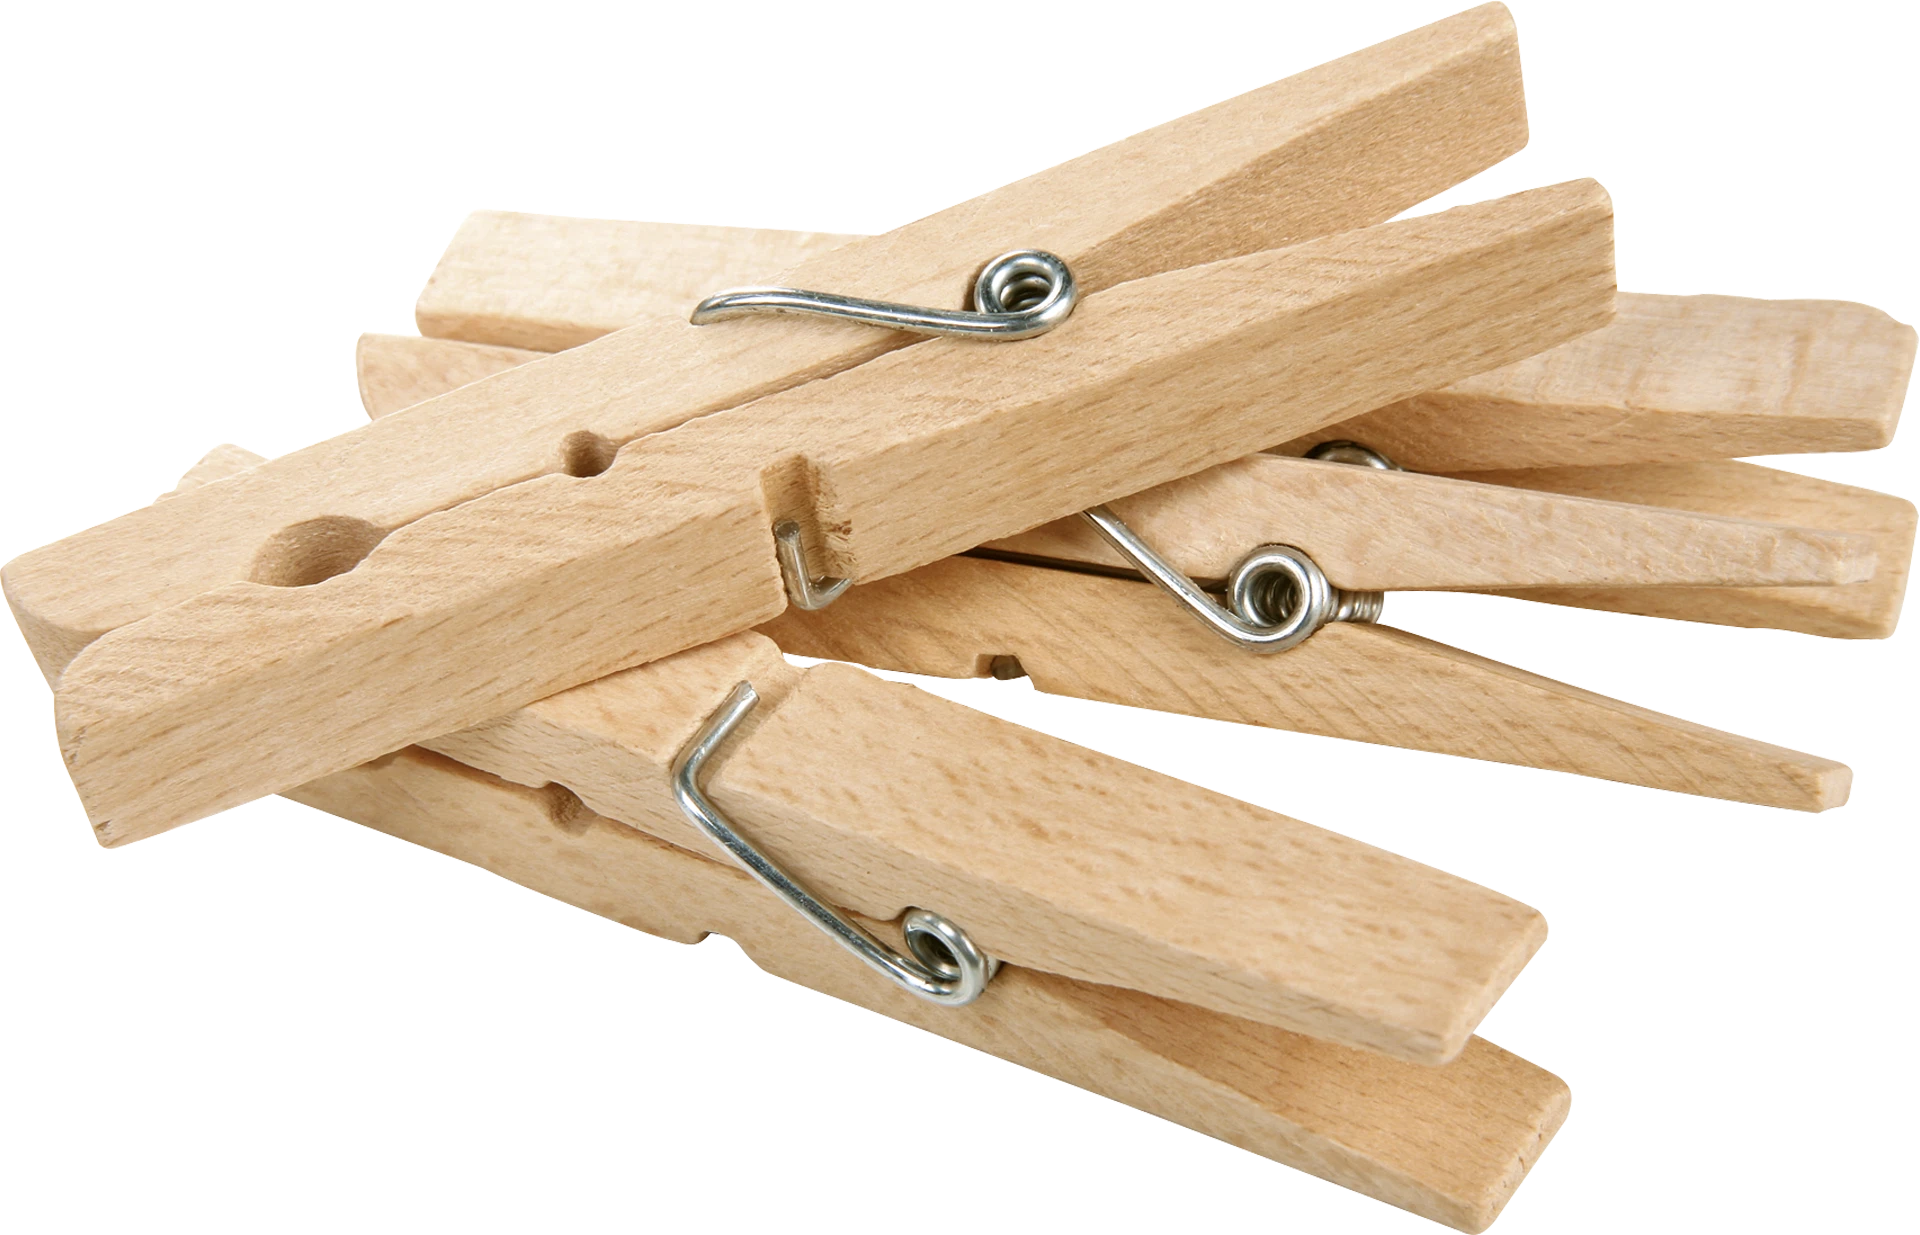 wooden clothes pegs “Jumbo”